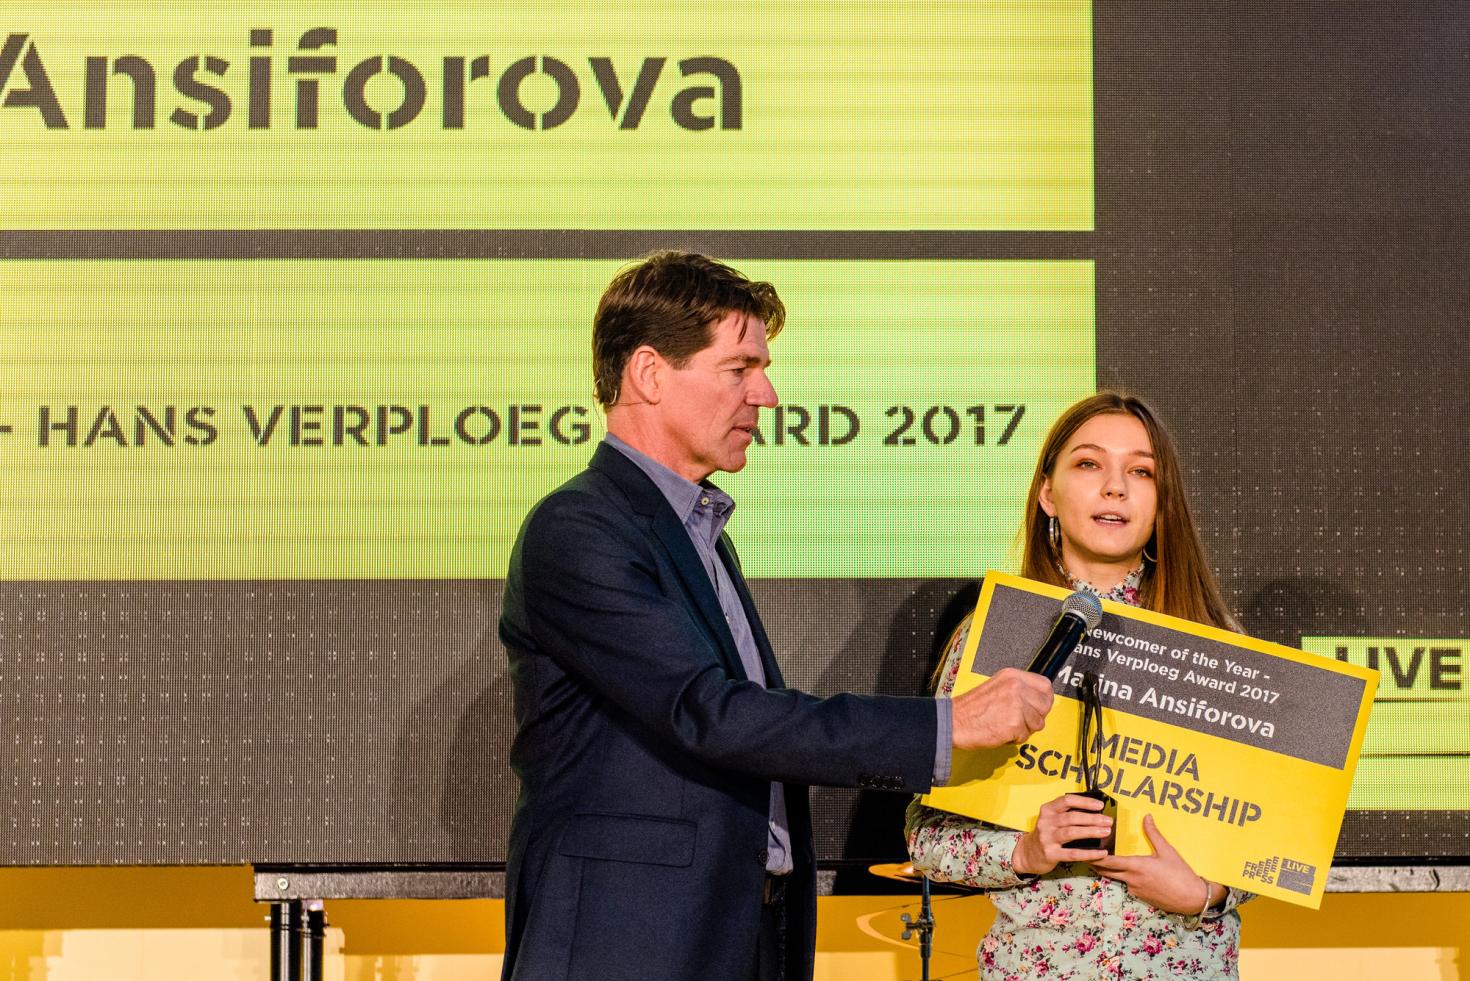 Maryna Ansiforova wins Newcomer of the Year Award in 2017. Photo by: Romy van den Boogaart